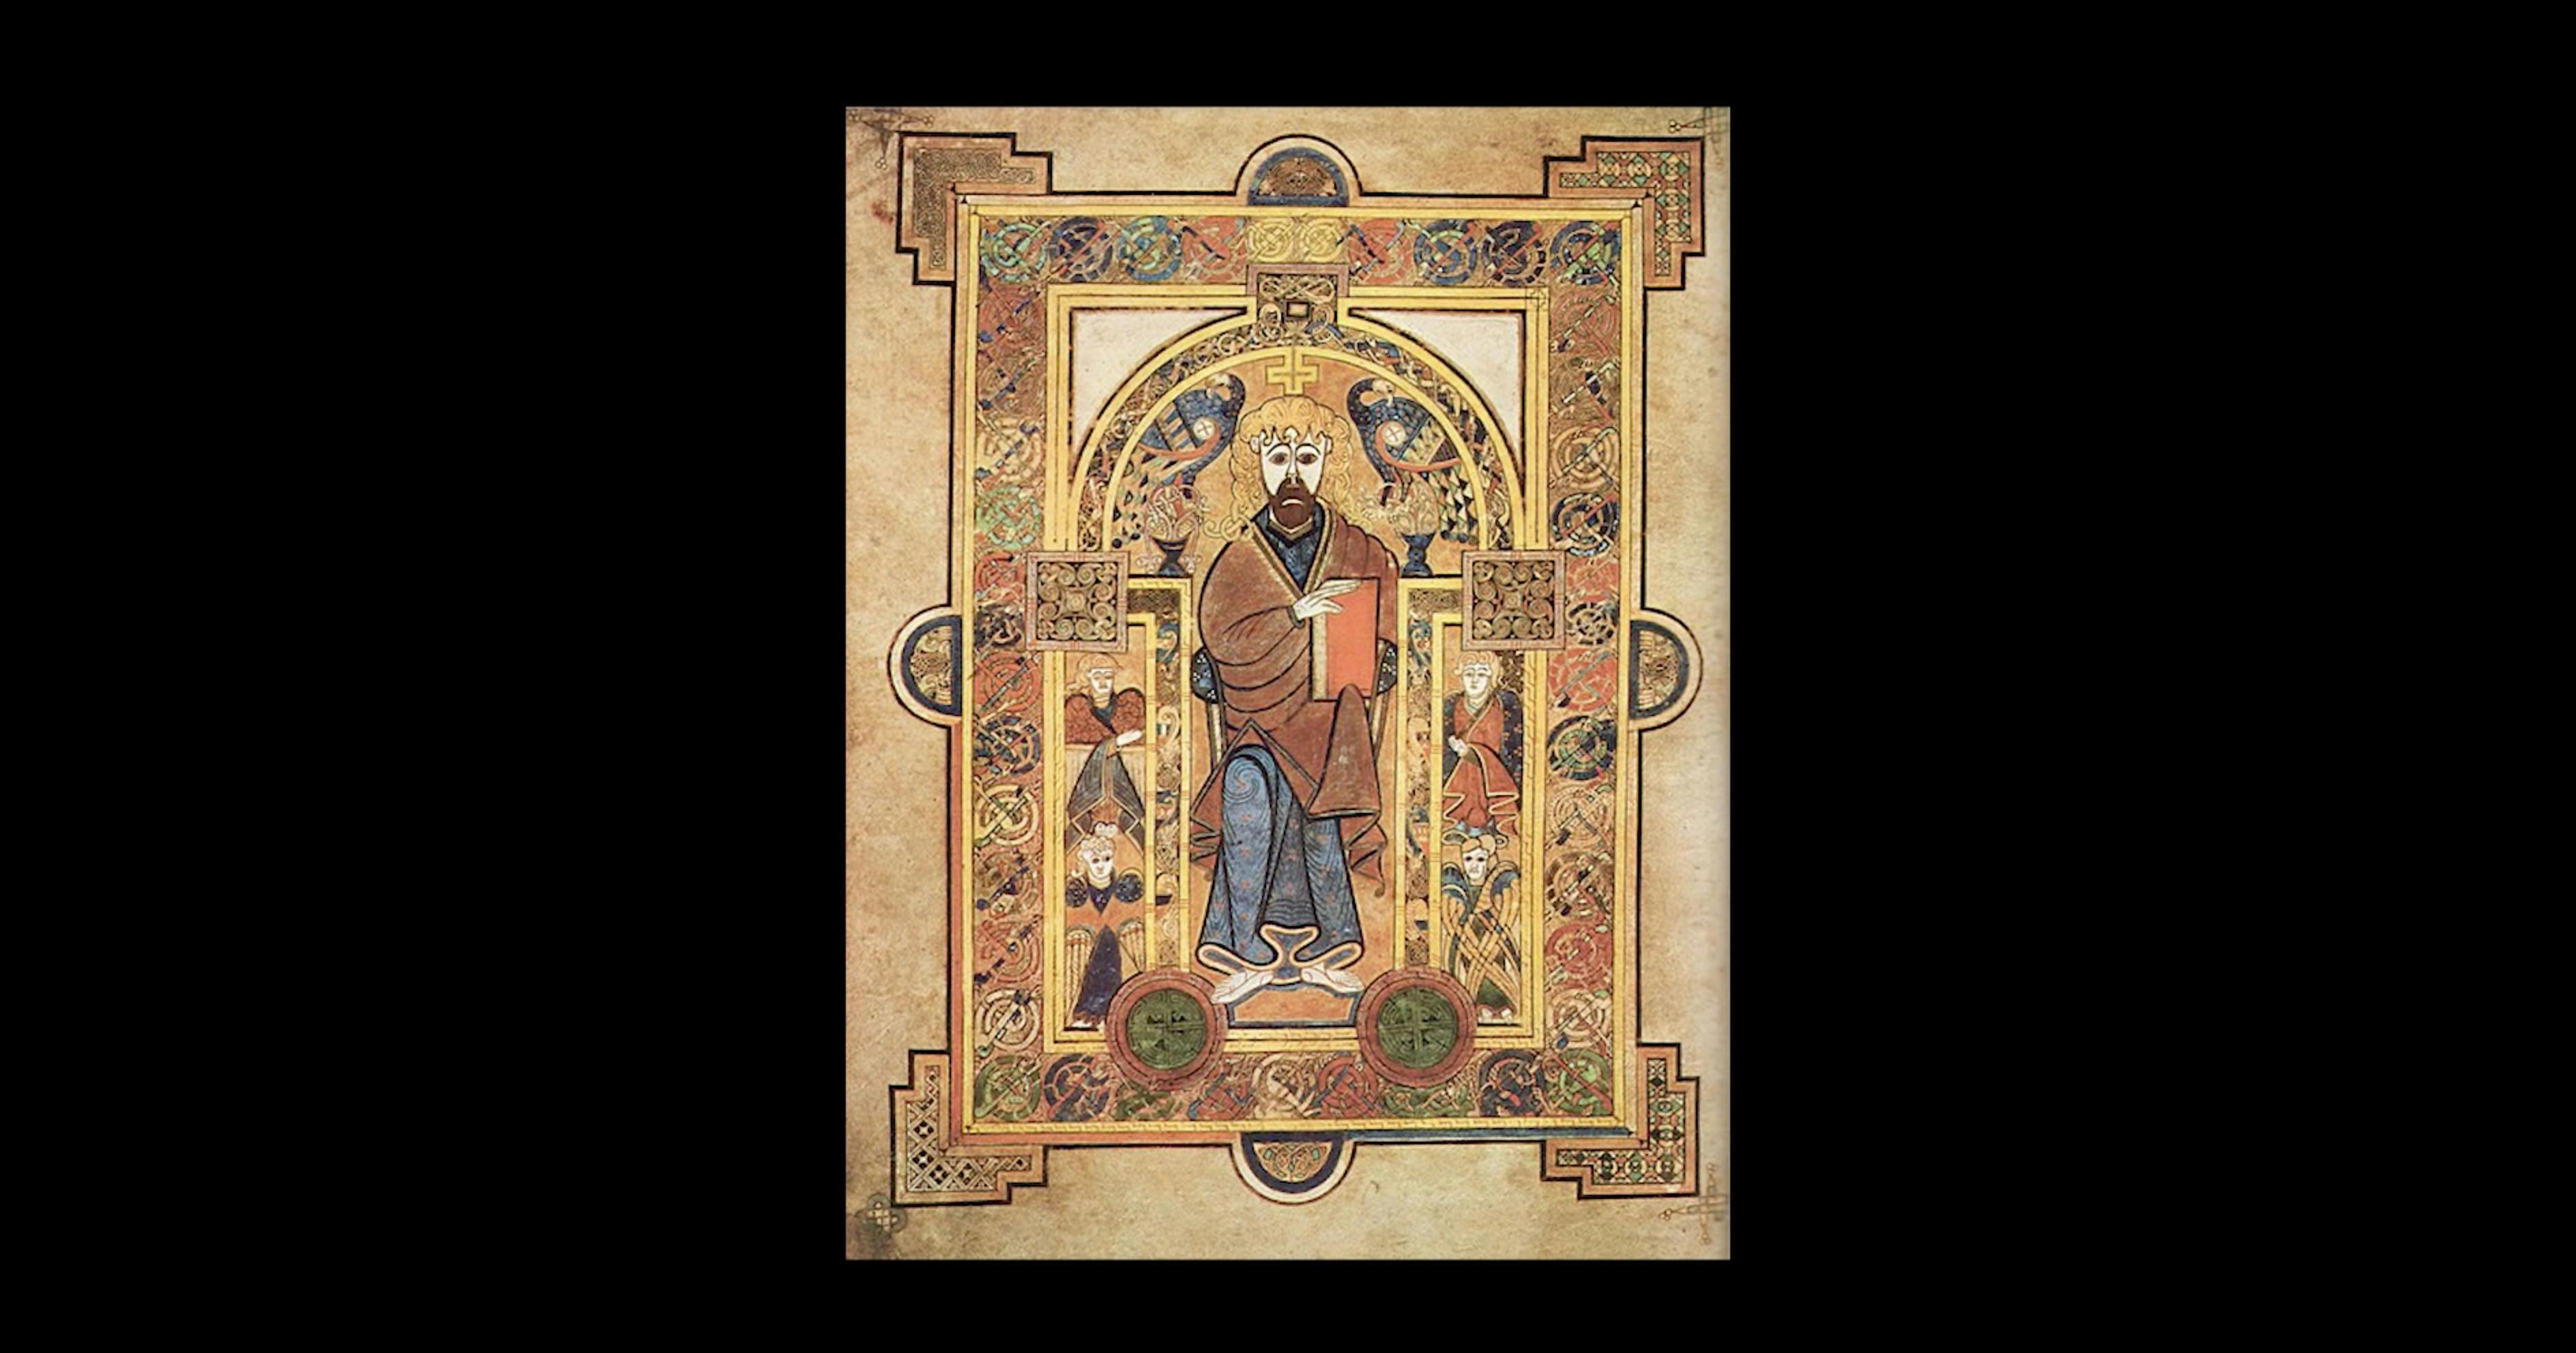 The Book Of Kells (Gift edition) Book